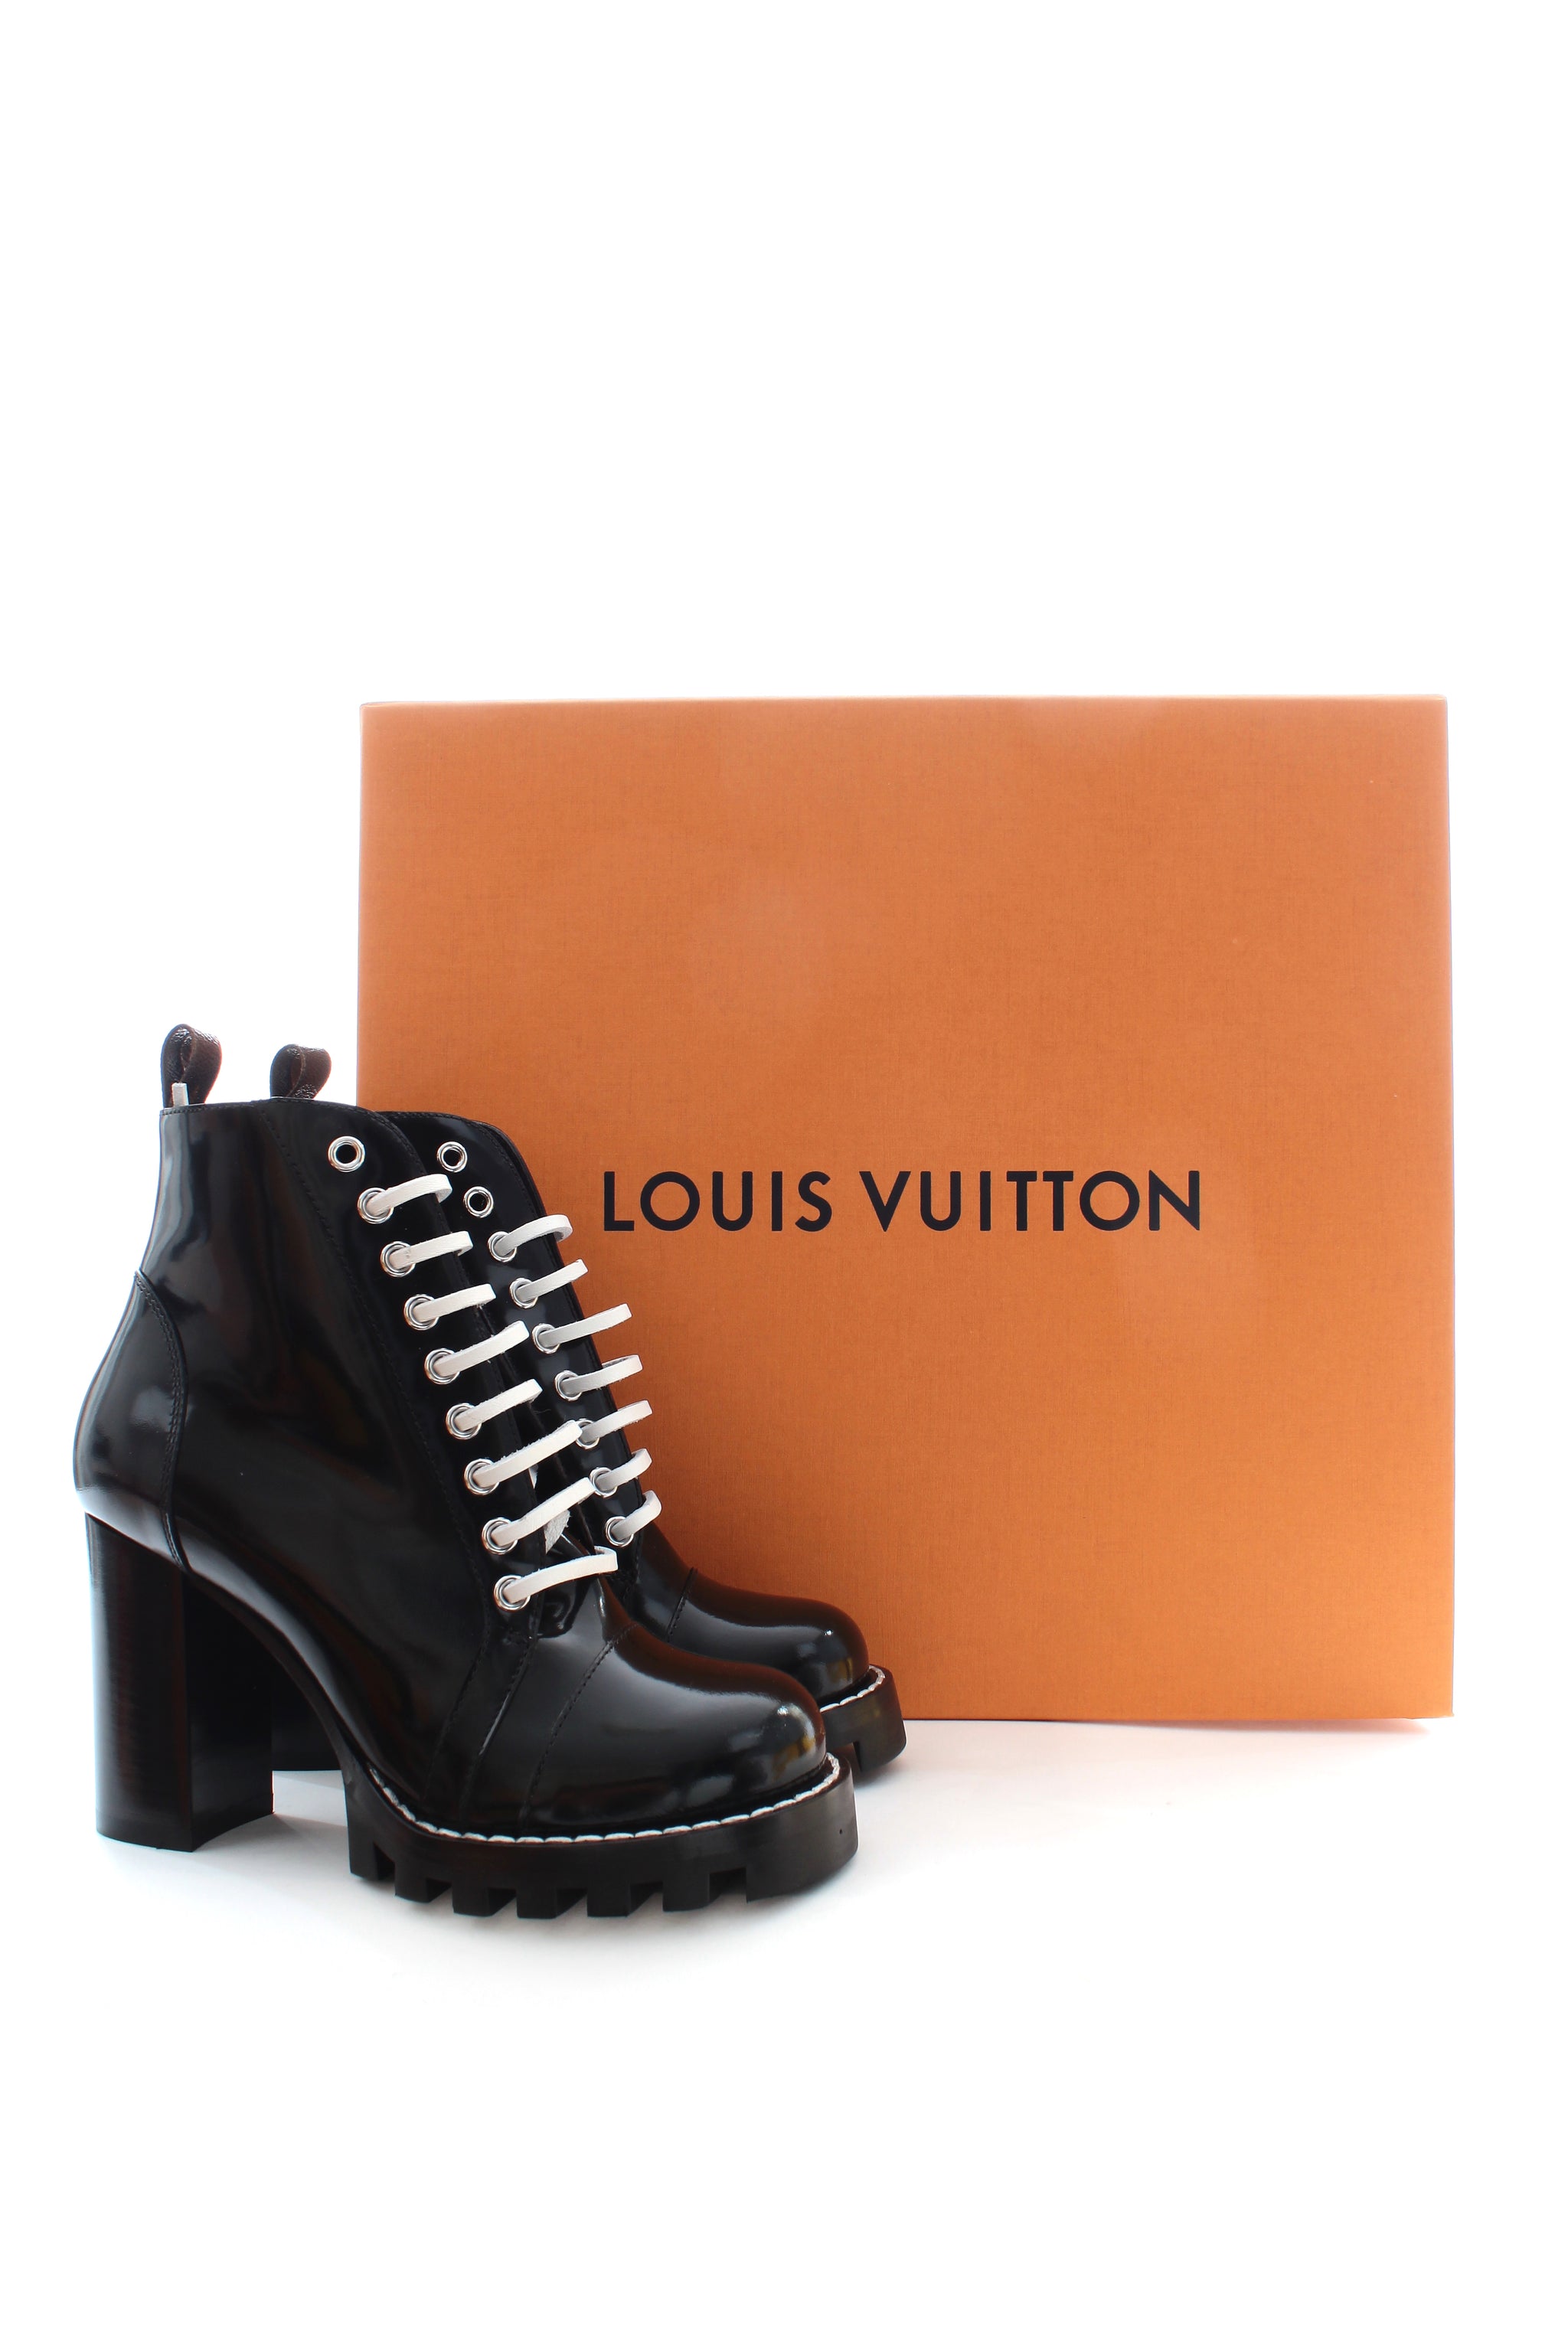 Louis Vuitton Patent Leather Star Trail Ankle Boots - Closet Upgrade